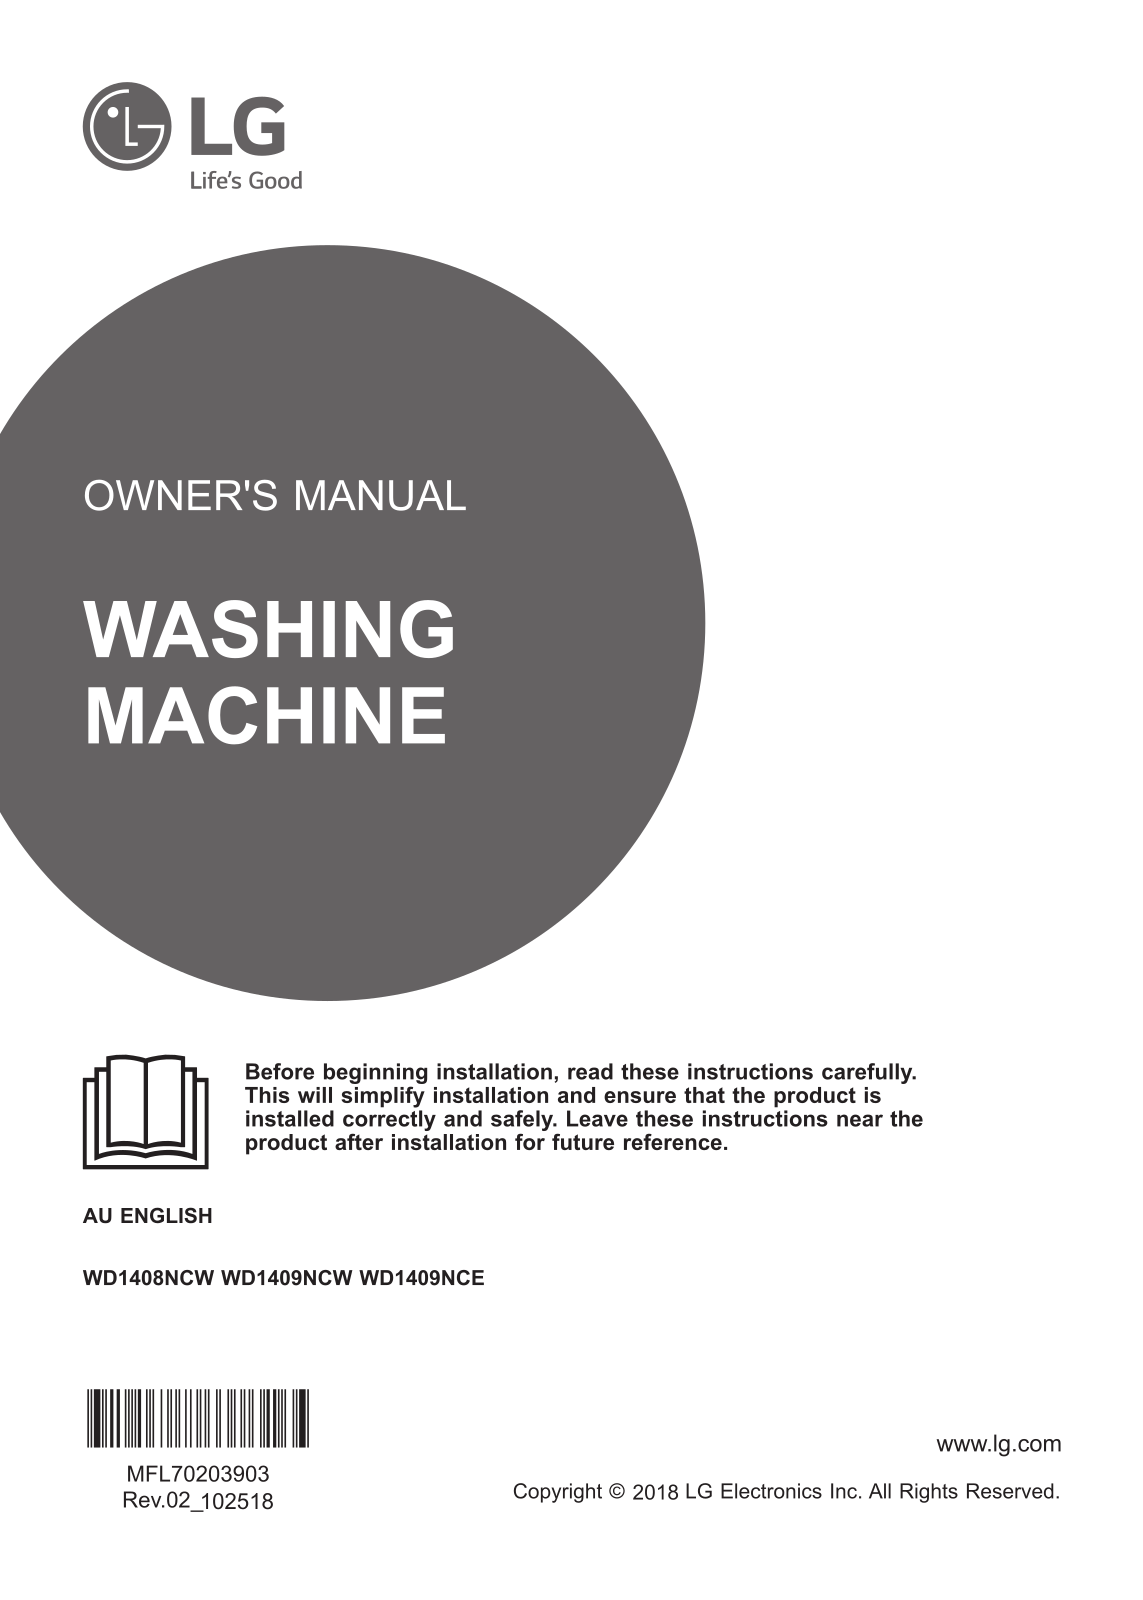 LG WD1409NCE Owner’s Manual